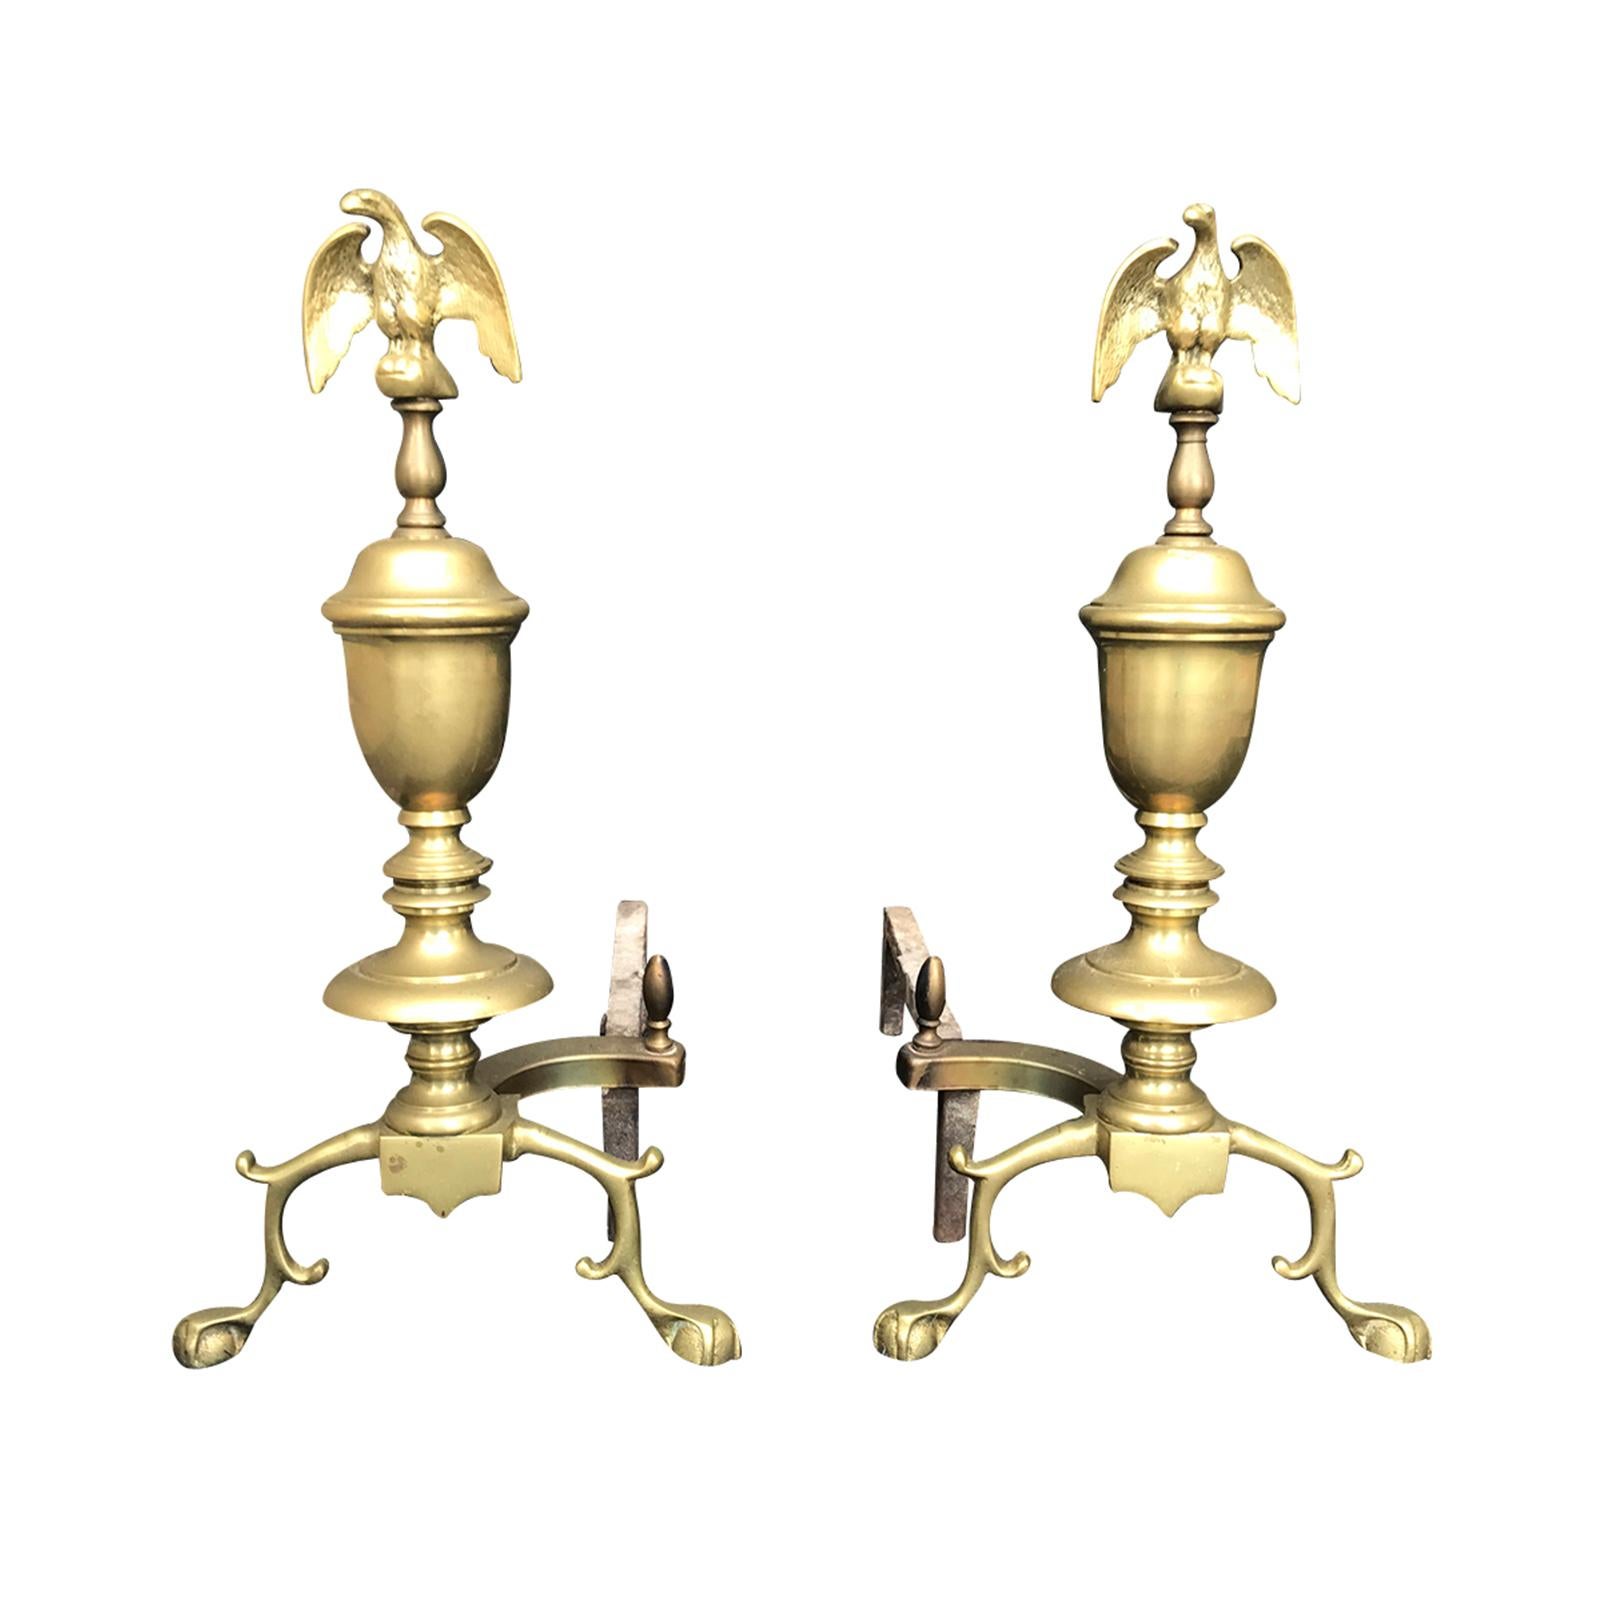 Pair of Early 20th Century Federal Style Andirons with Eagles For Sale